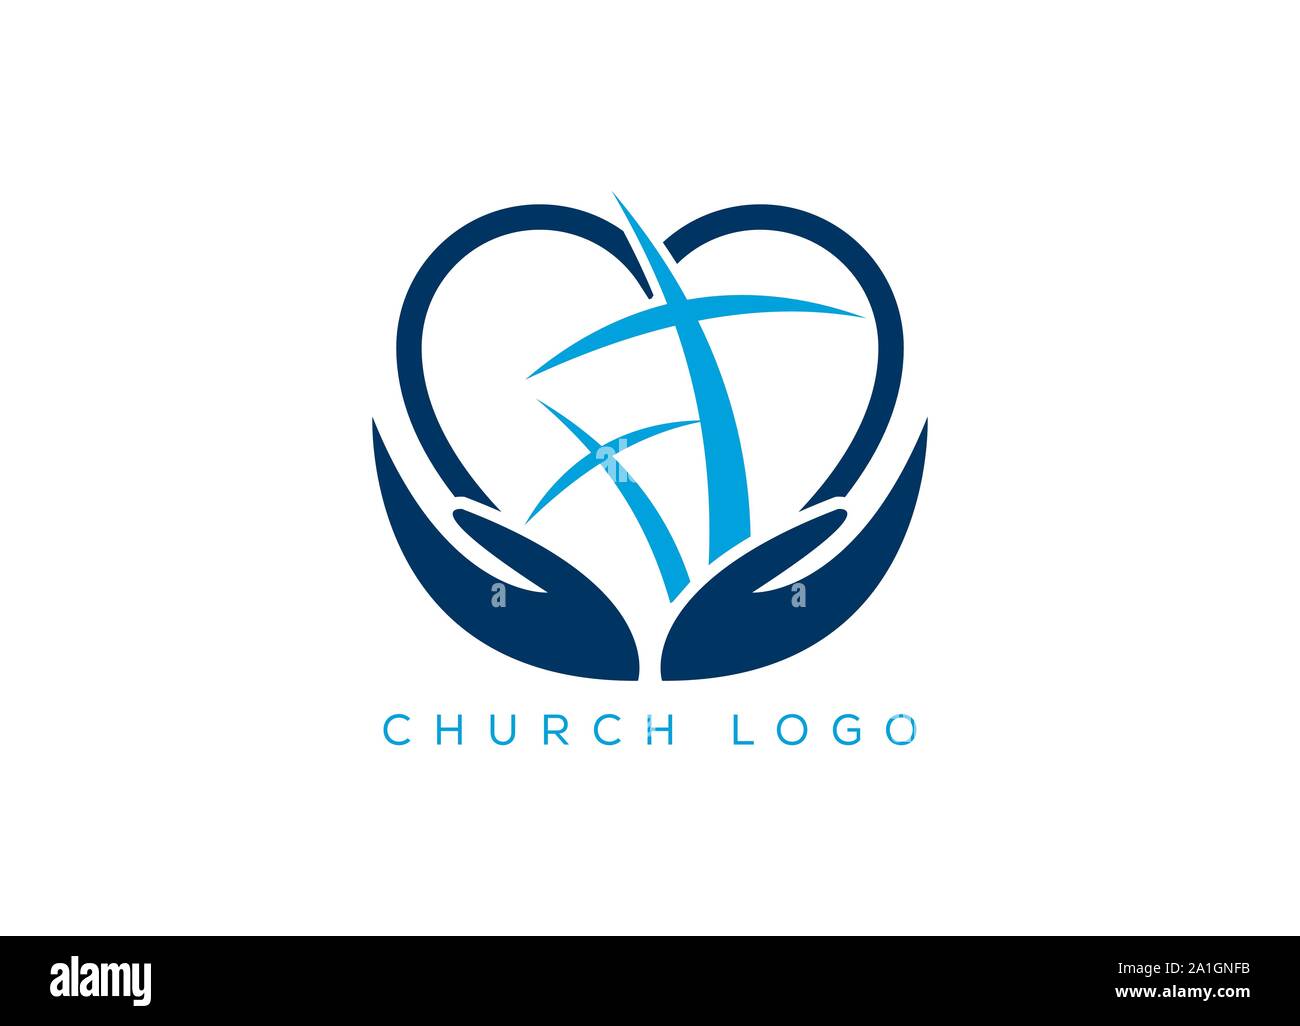 Church logo. Christian symbols. The Cross of Jesus, Template logo for churches and Christian organizations cross of Calvary in the sun. Stock Vector